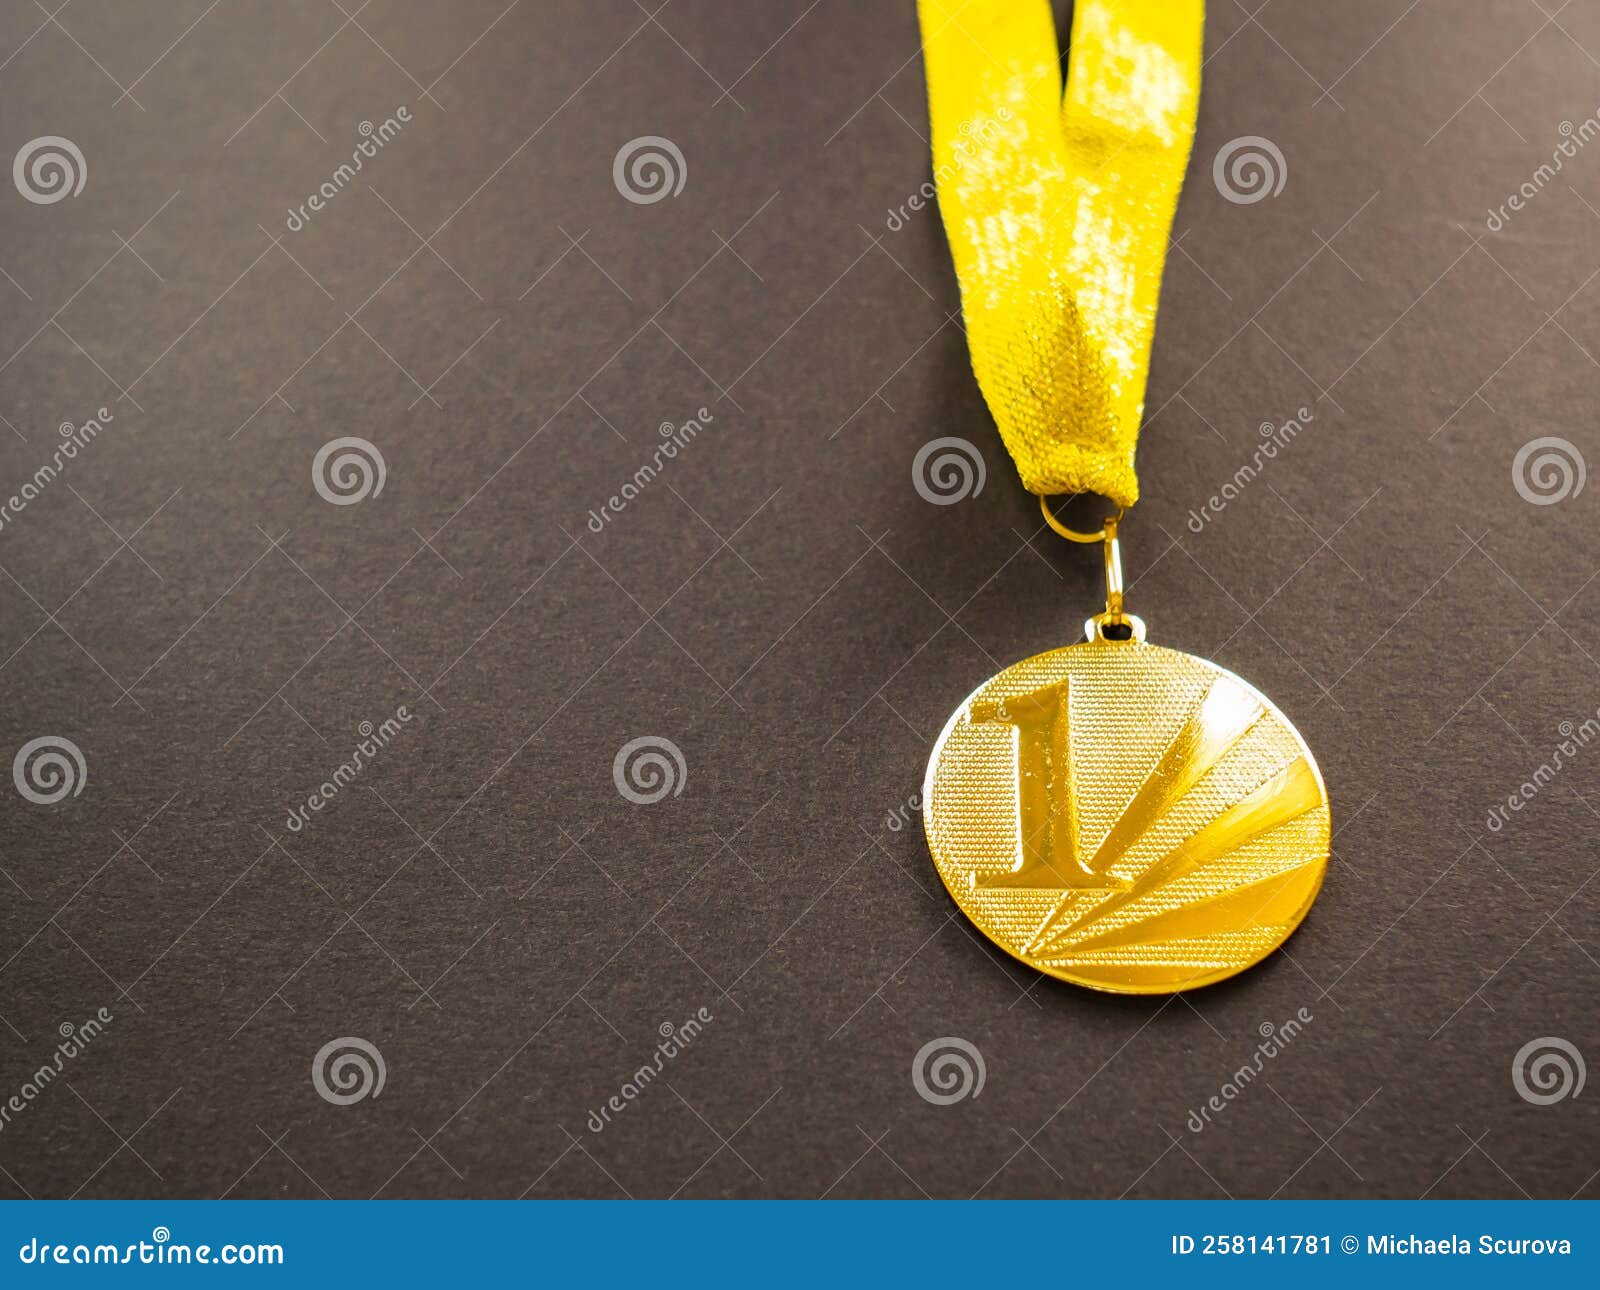 gold medal for the first place winner. concept of success